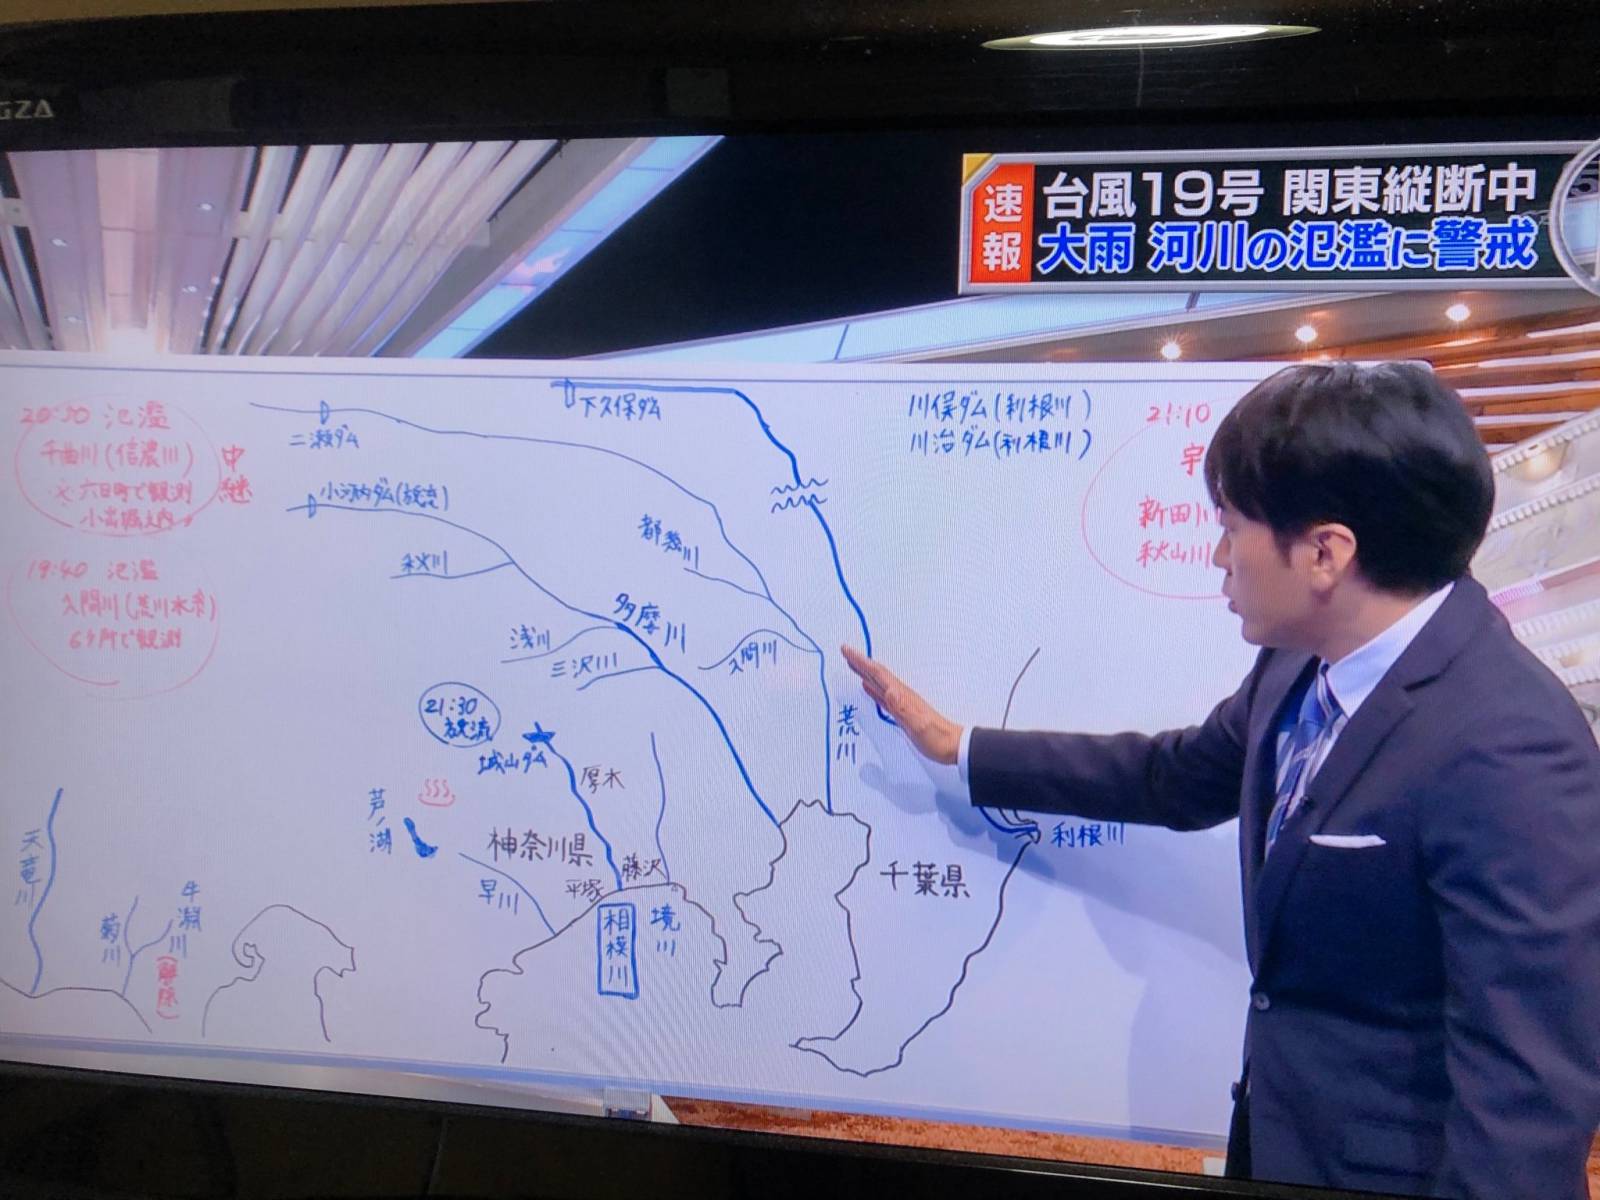 [Typhoon No. 19] Anzai Ana, a topic that handwritten maps are too good